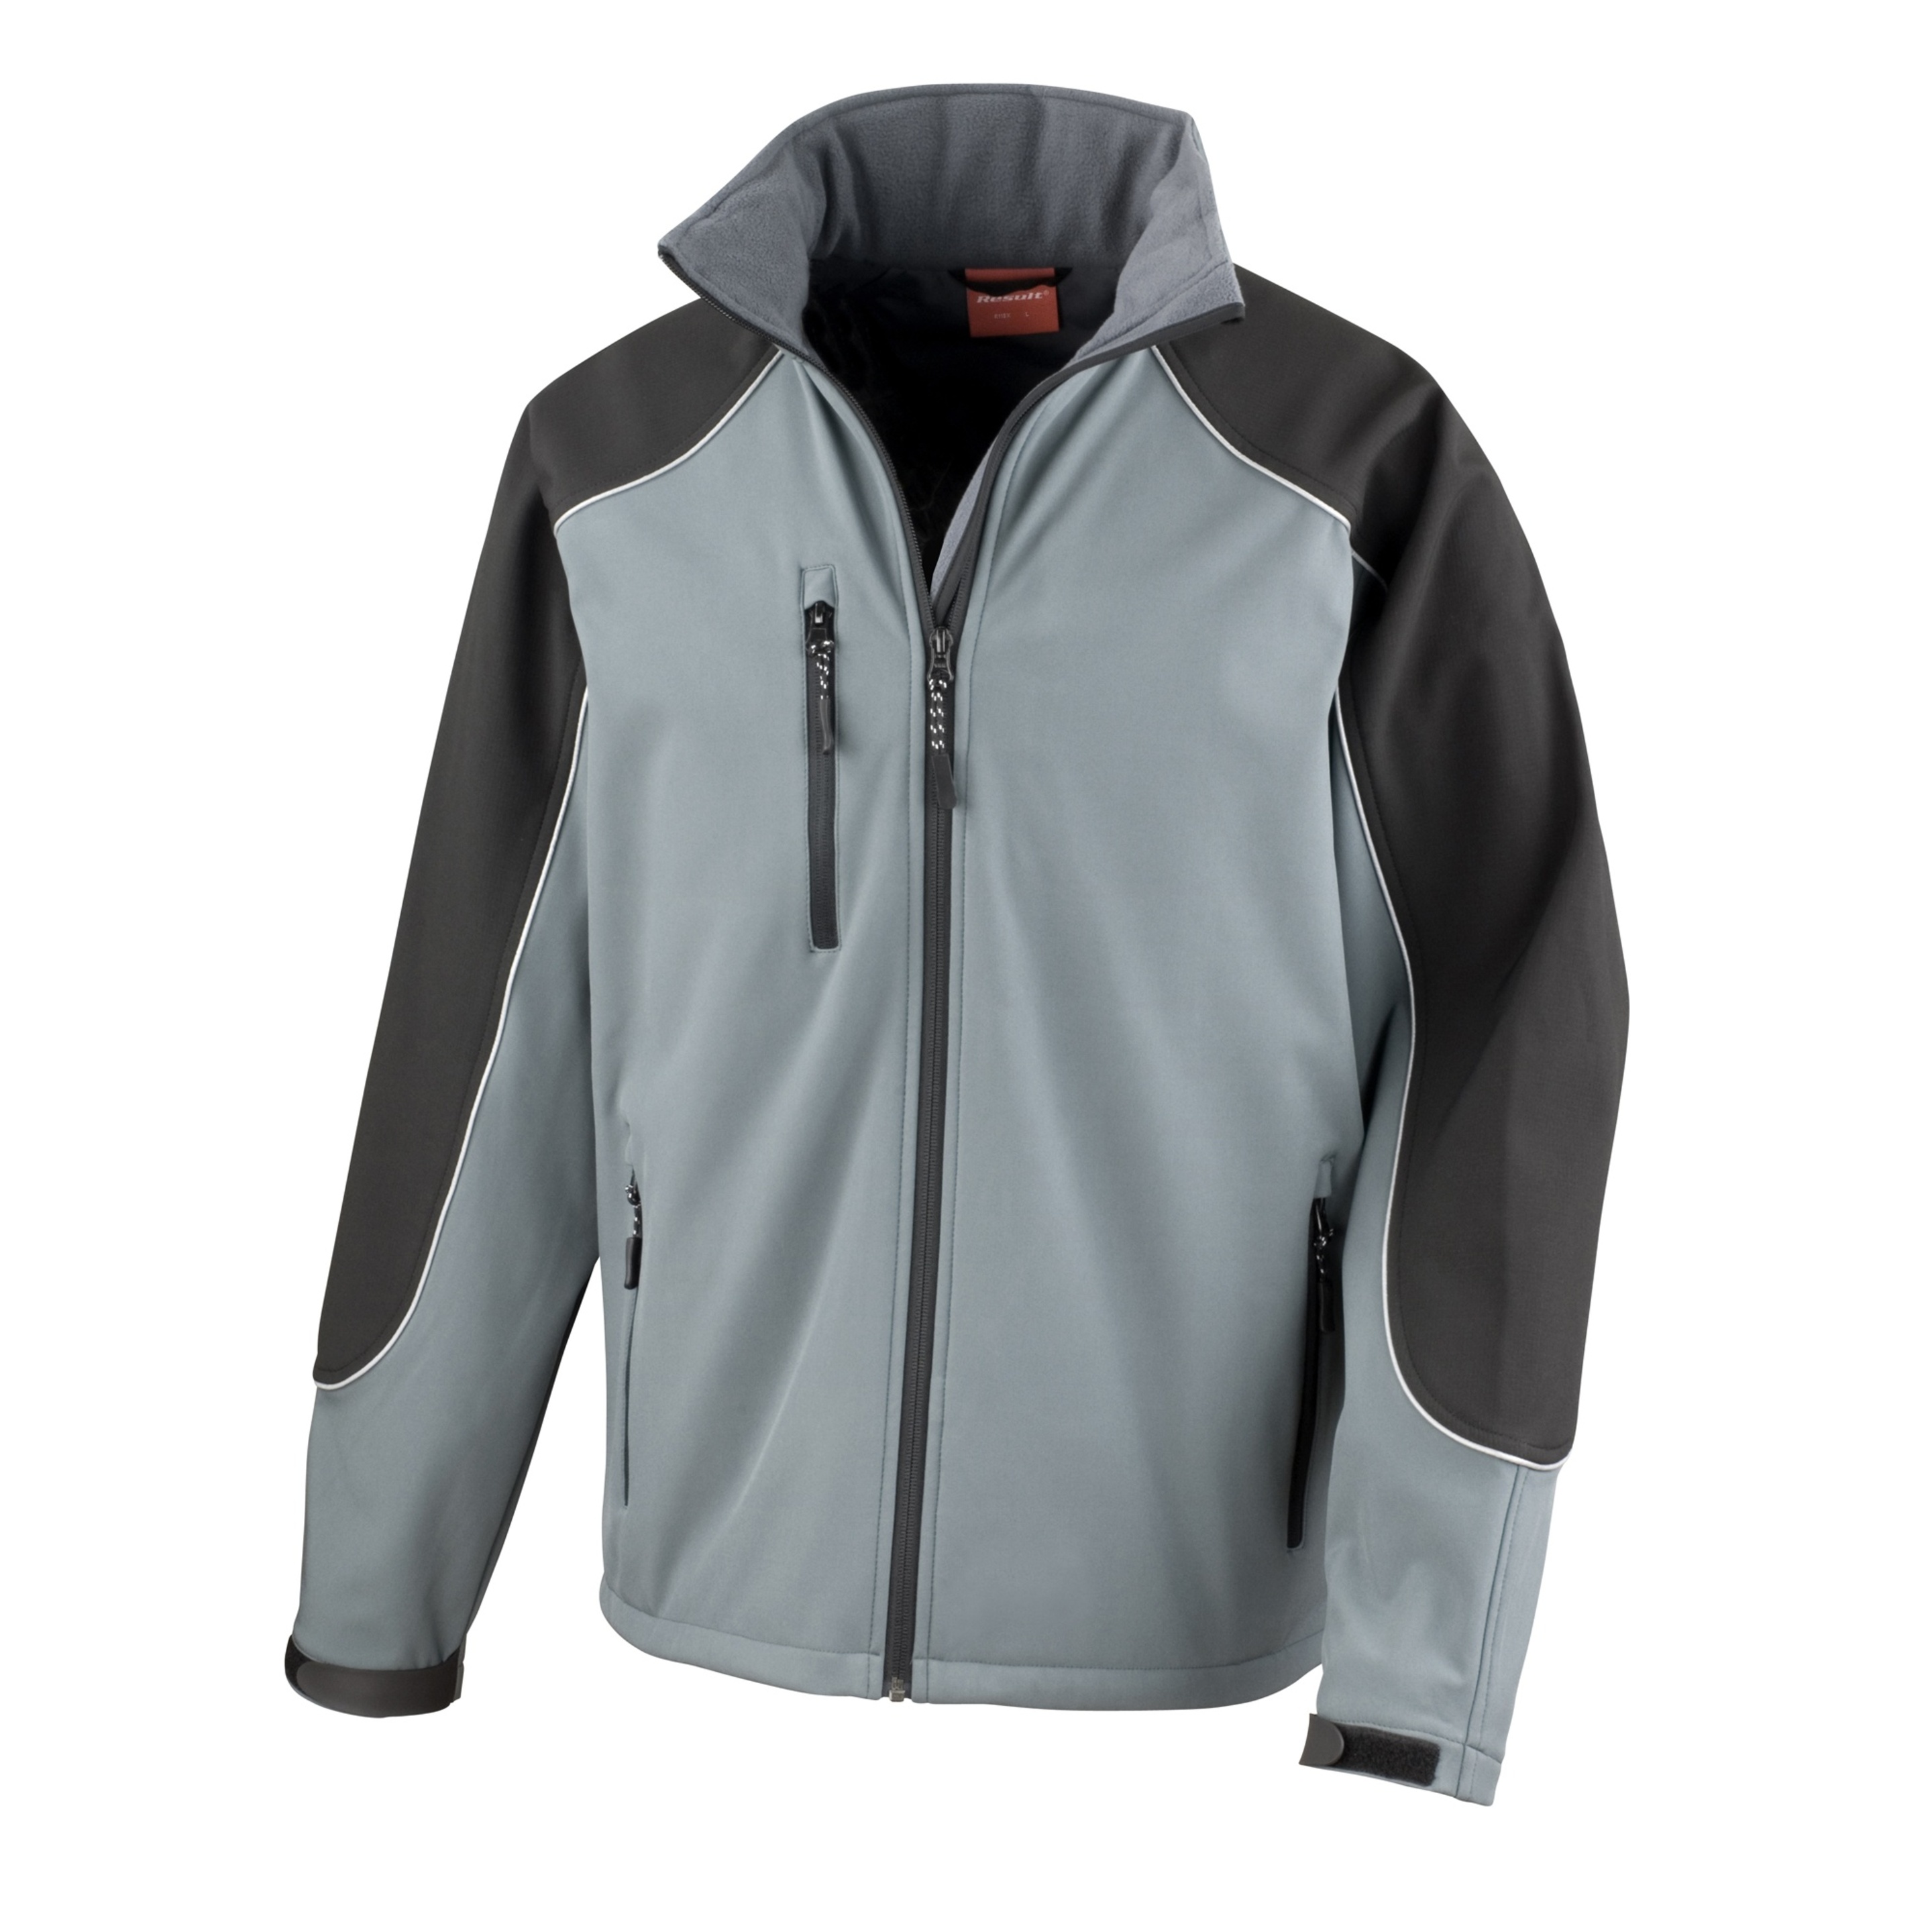 Chaqueta Softshell Con Capucha Transpirable E Impermeable Modelo Ice Fell Result - gris - 